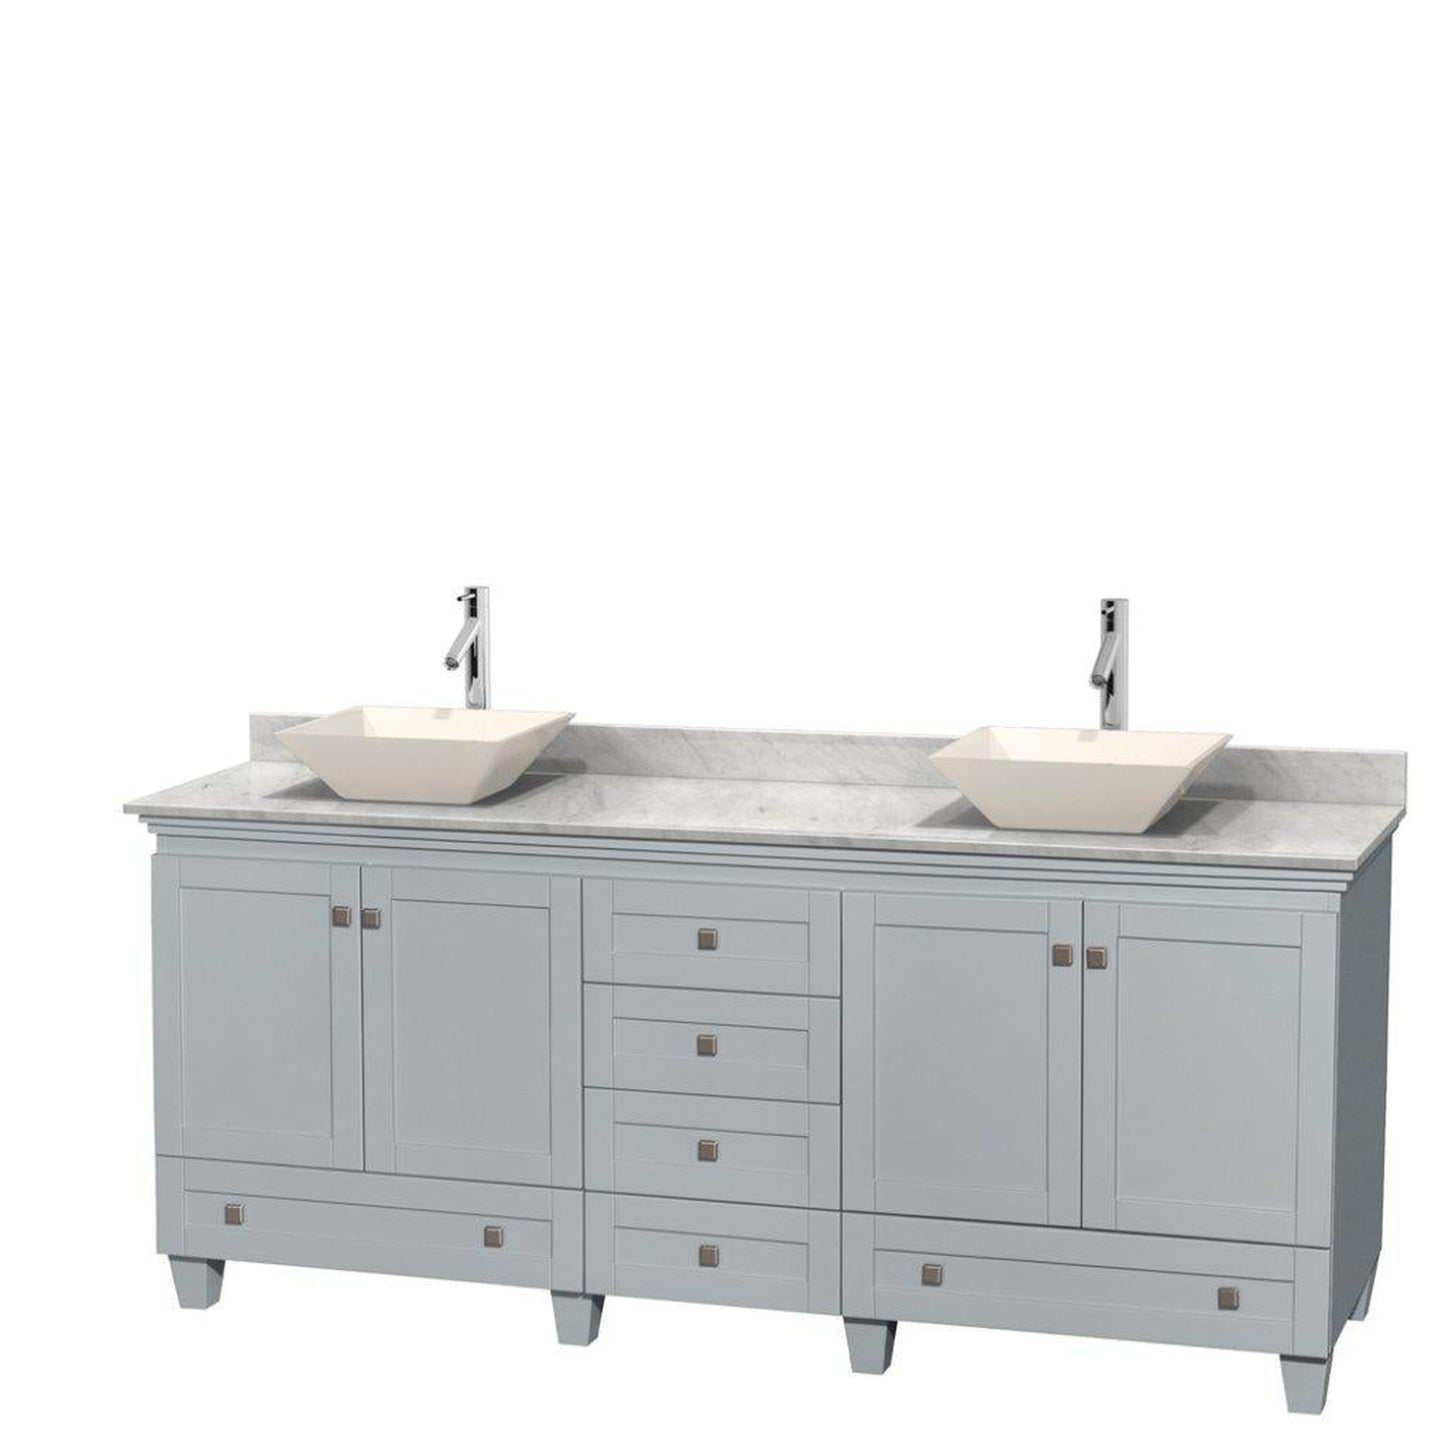 Wyndham Collection Acclaim 80" Double Bathroom Oyster Gray Vanity With White Carrara Marble Countertop And Pyra Bone Porcelain Sinks